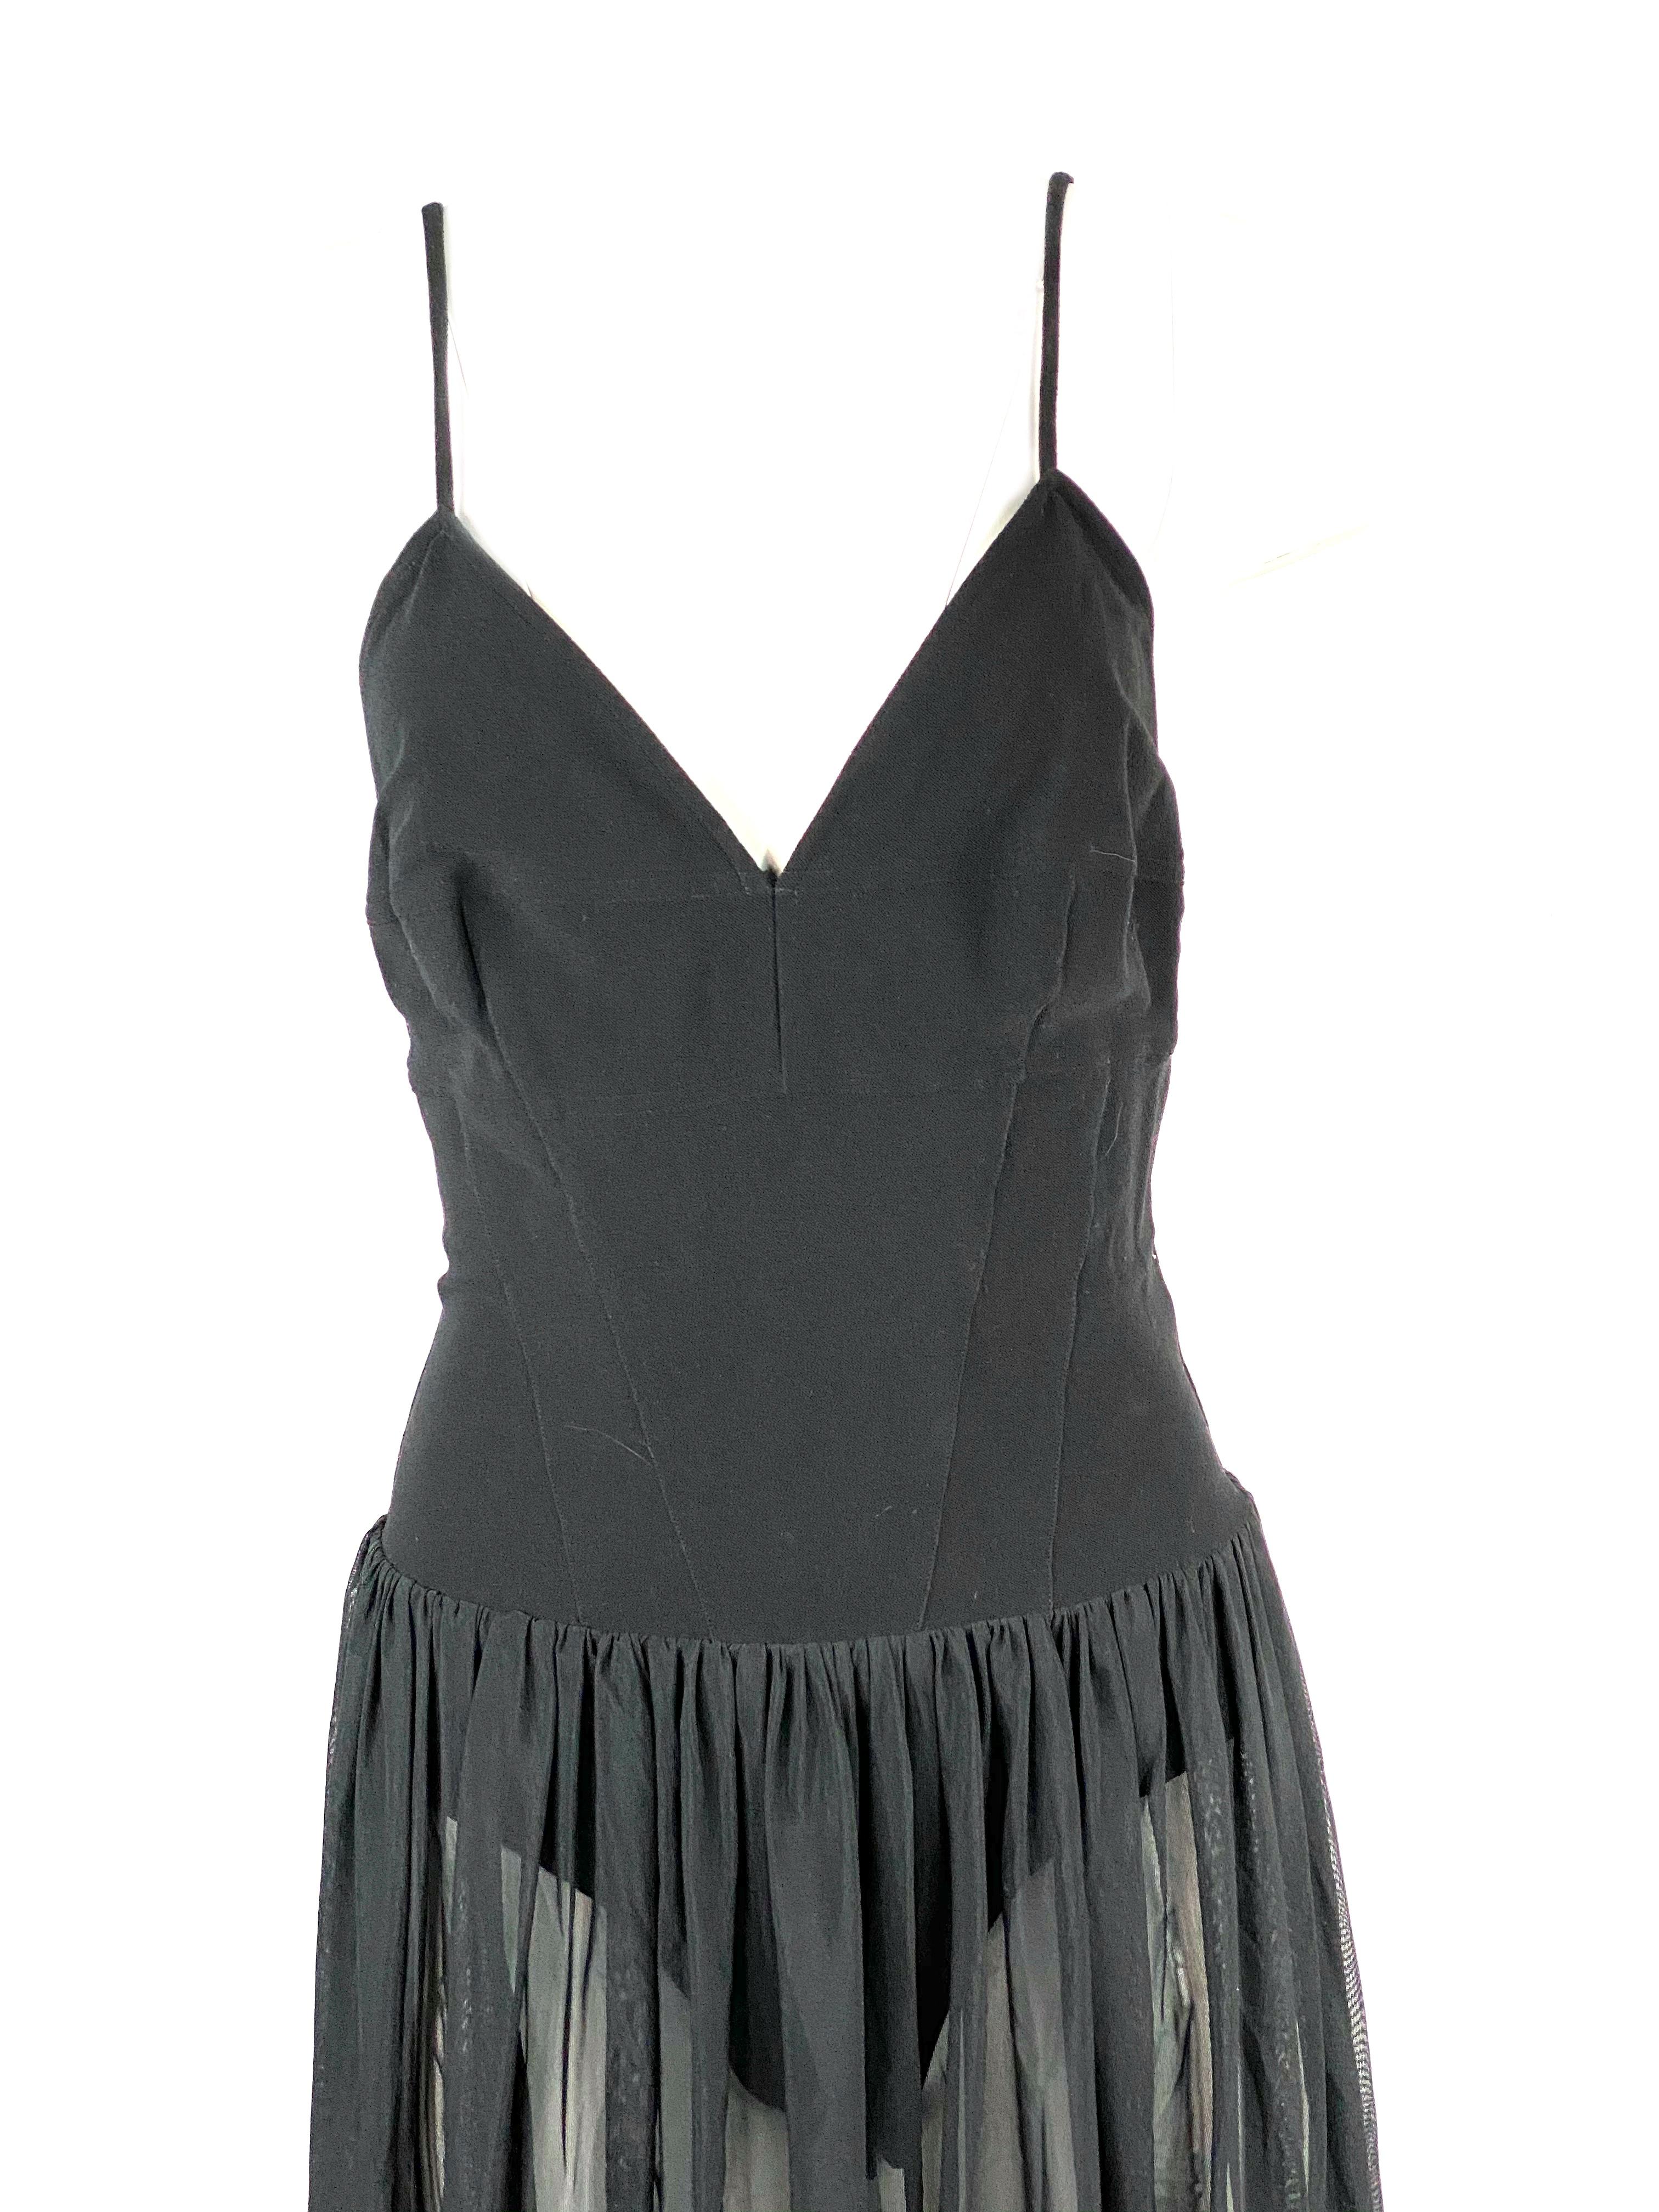 Karl Lagerfeld Black Spaghetti Strap Mini Dress Size 40

Product details:
Size 40
Featuring spaghetti strap, measure 7” on the front and 13” on the back
V neckline on the front
Open back 
See through skirt 
Rear zip and hook closure 
Made in France
